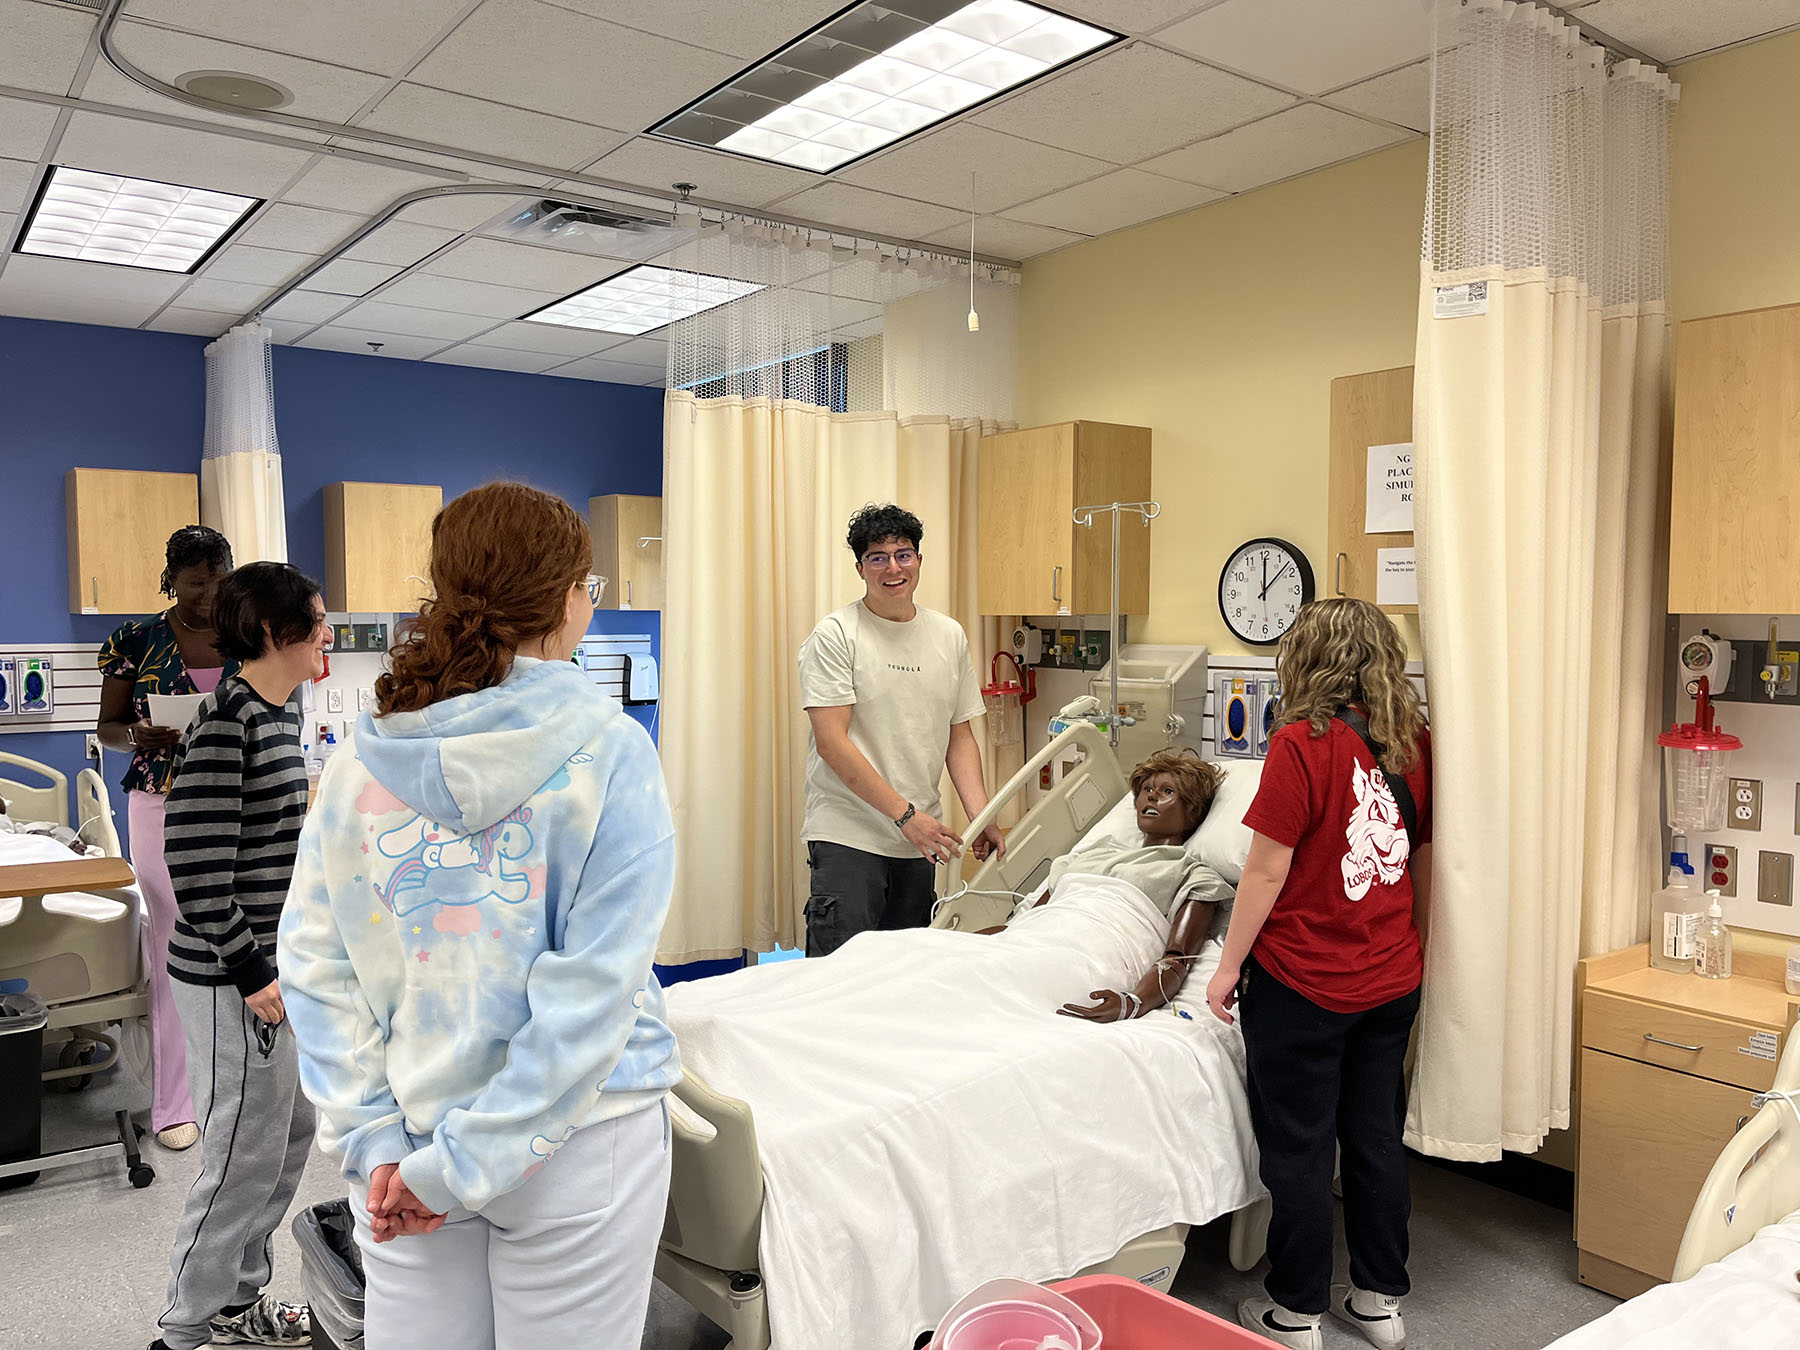 High school students attend to a dummy in a hospital bed